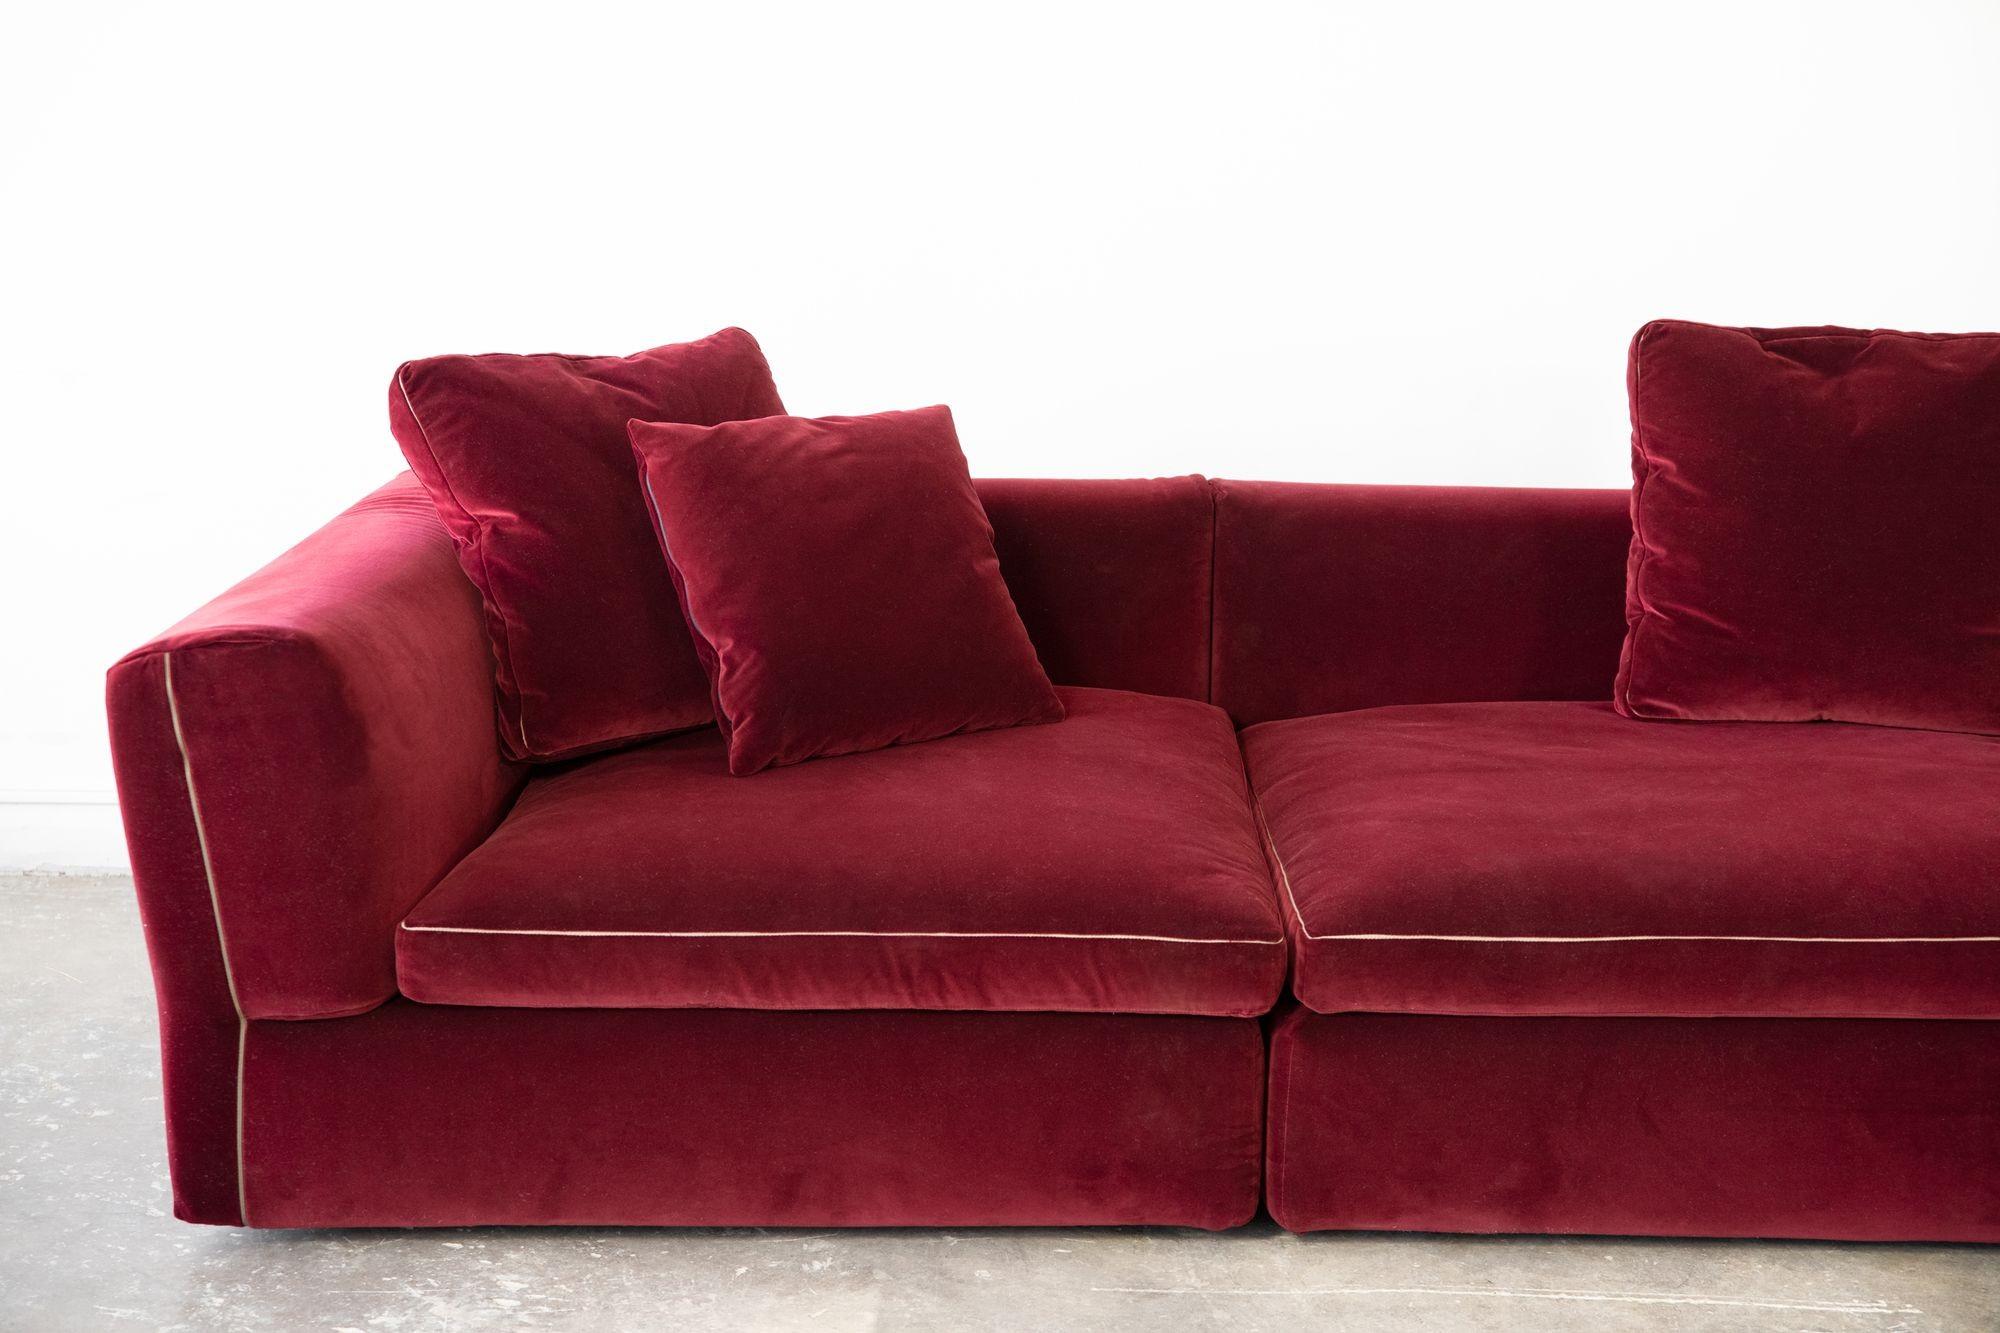 Velvet 'Dress-Up' Sectional Sofa Designed by Rodolfo Dordoni for Cassina In Good Condition For Sale In Dallas, TX